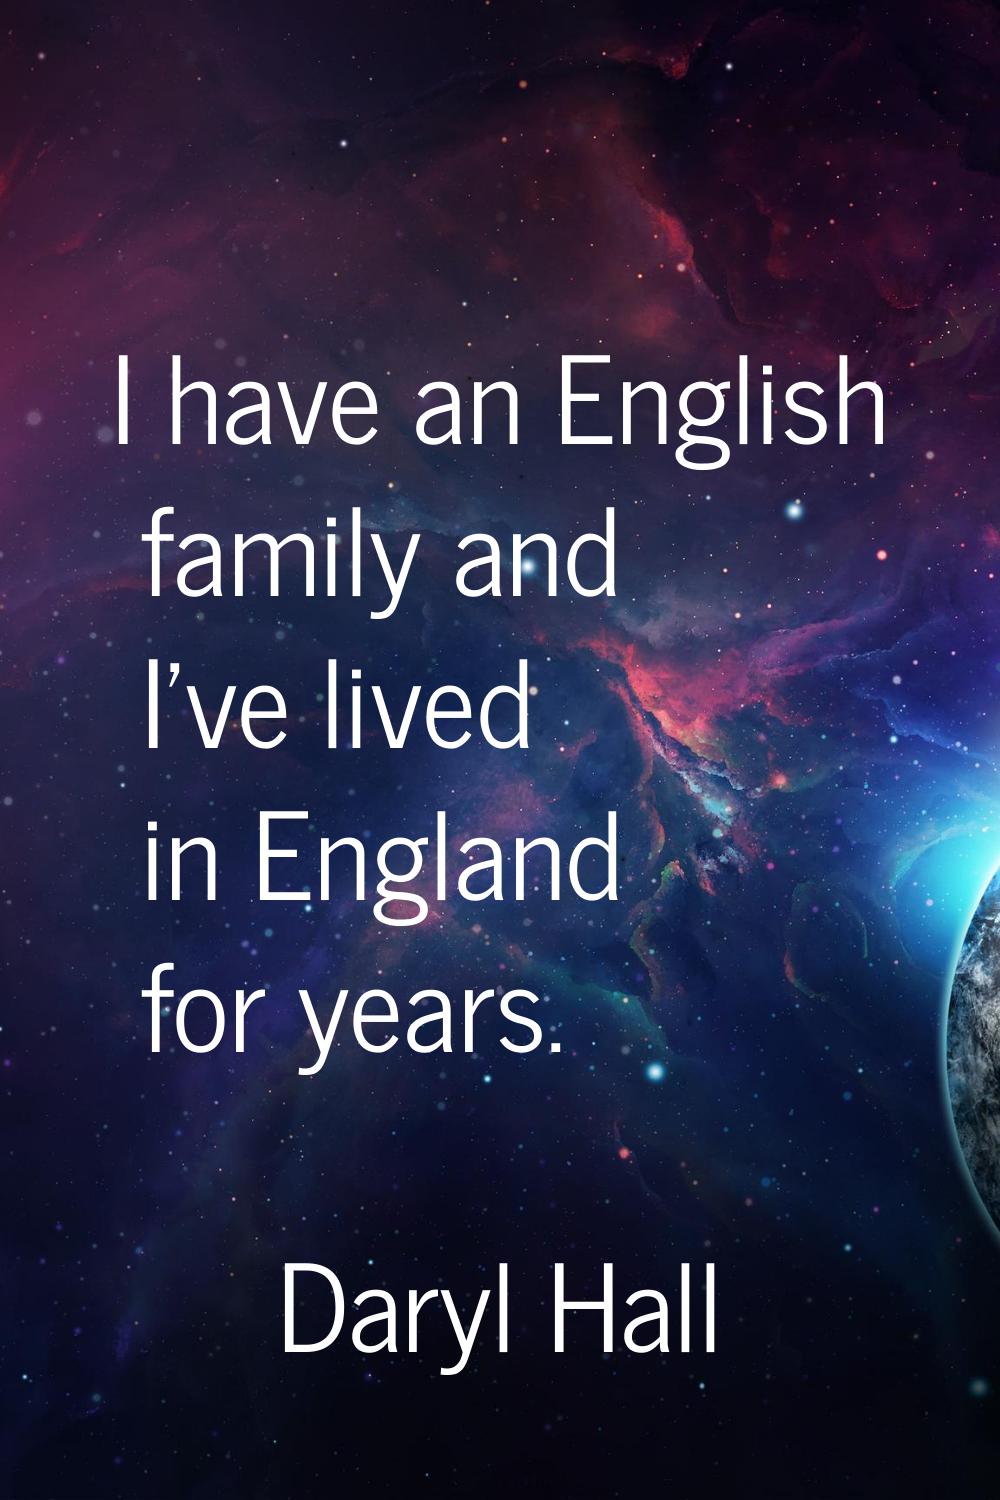 I have an English family and I've lived in England for years.